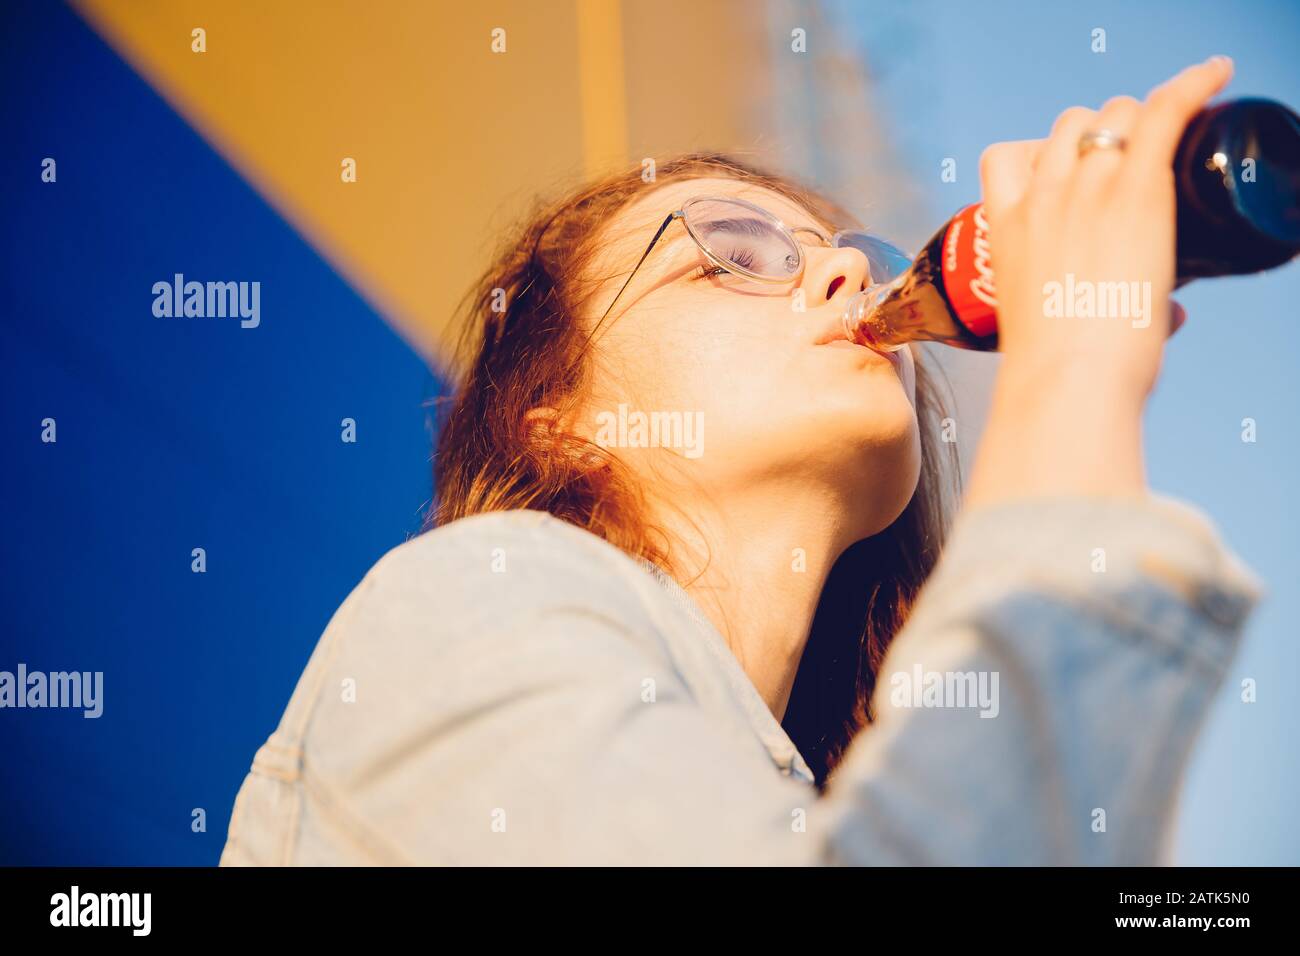 Moscow, Russia - June 27, 2019: Beautiful young woman happy drinking Coca Cola glass bottle soda in hand, sunset Stock Photo